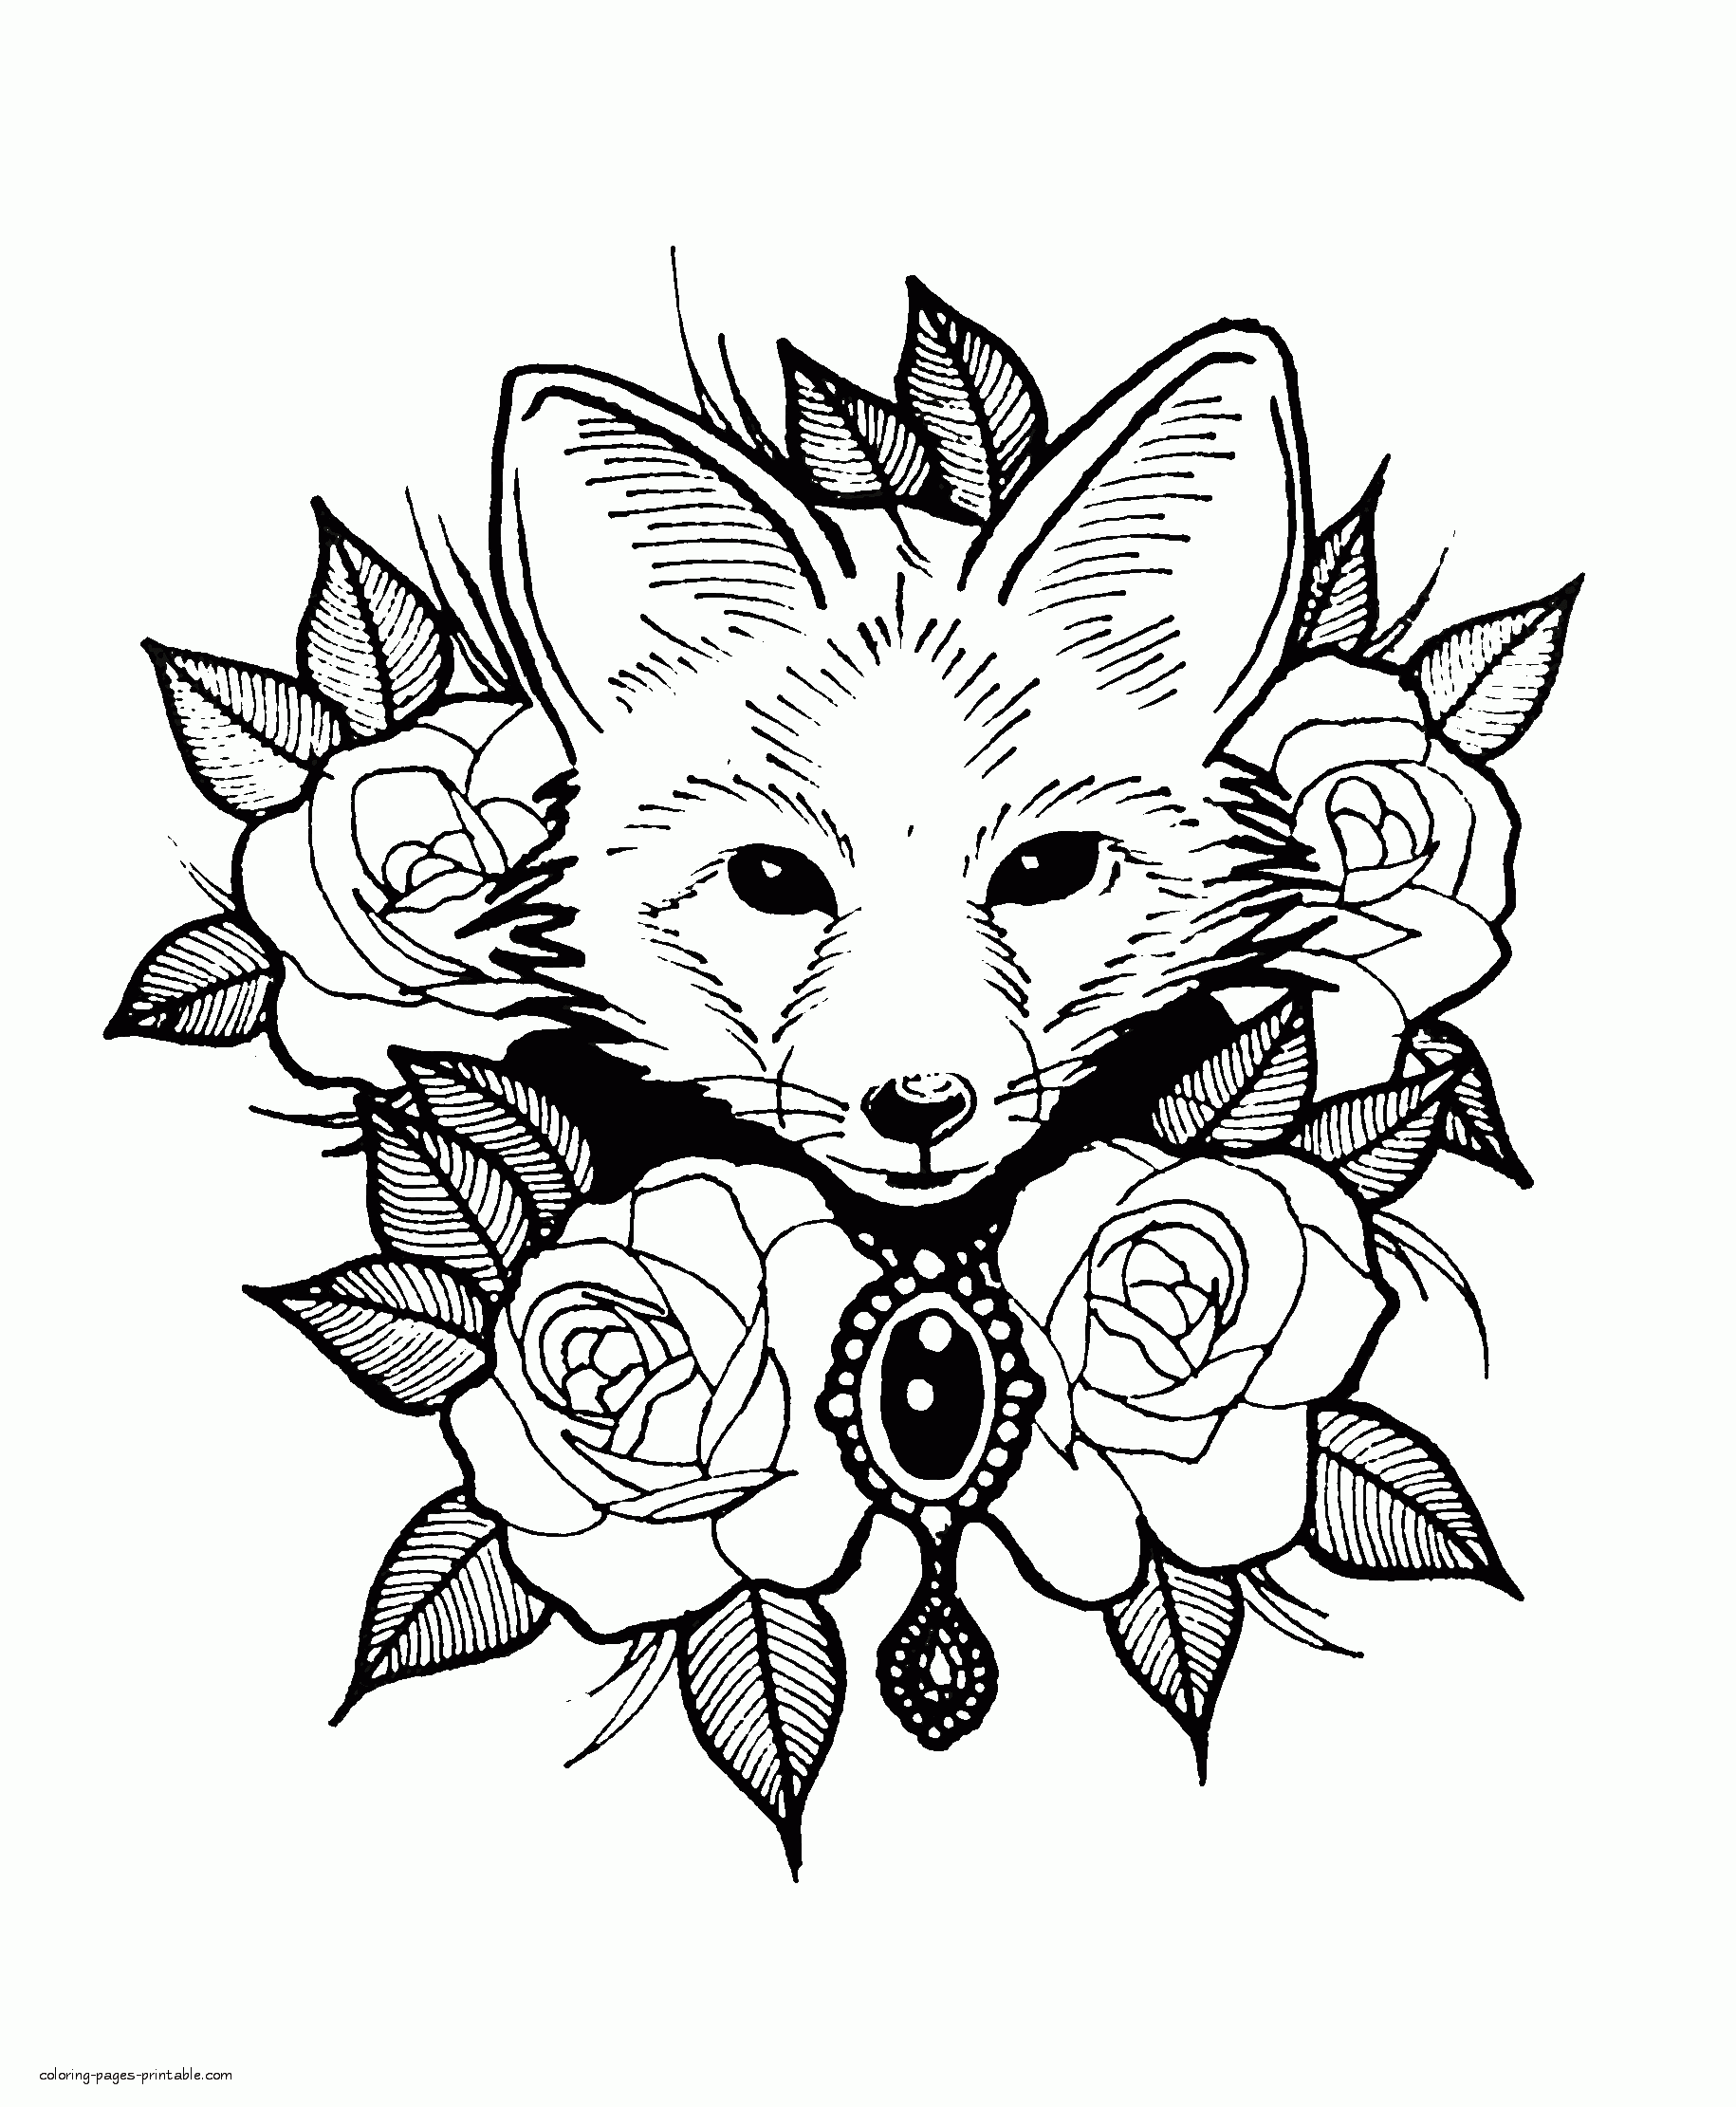 Fox Pup Coloring Page